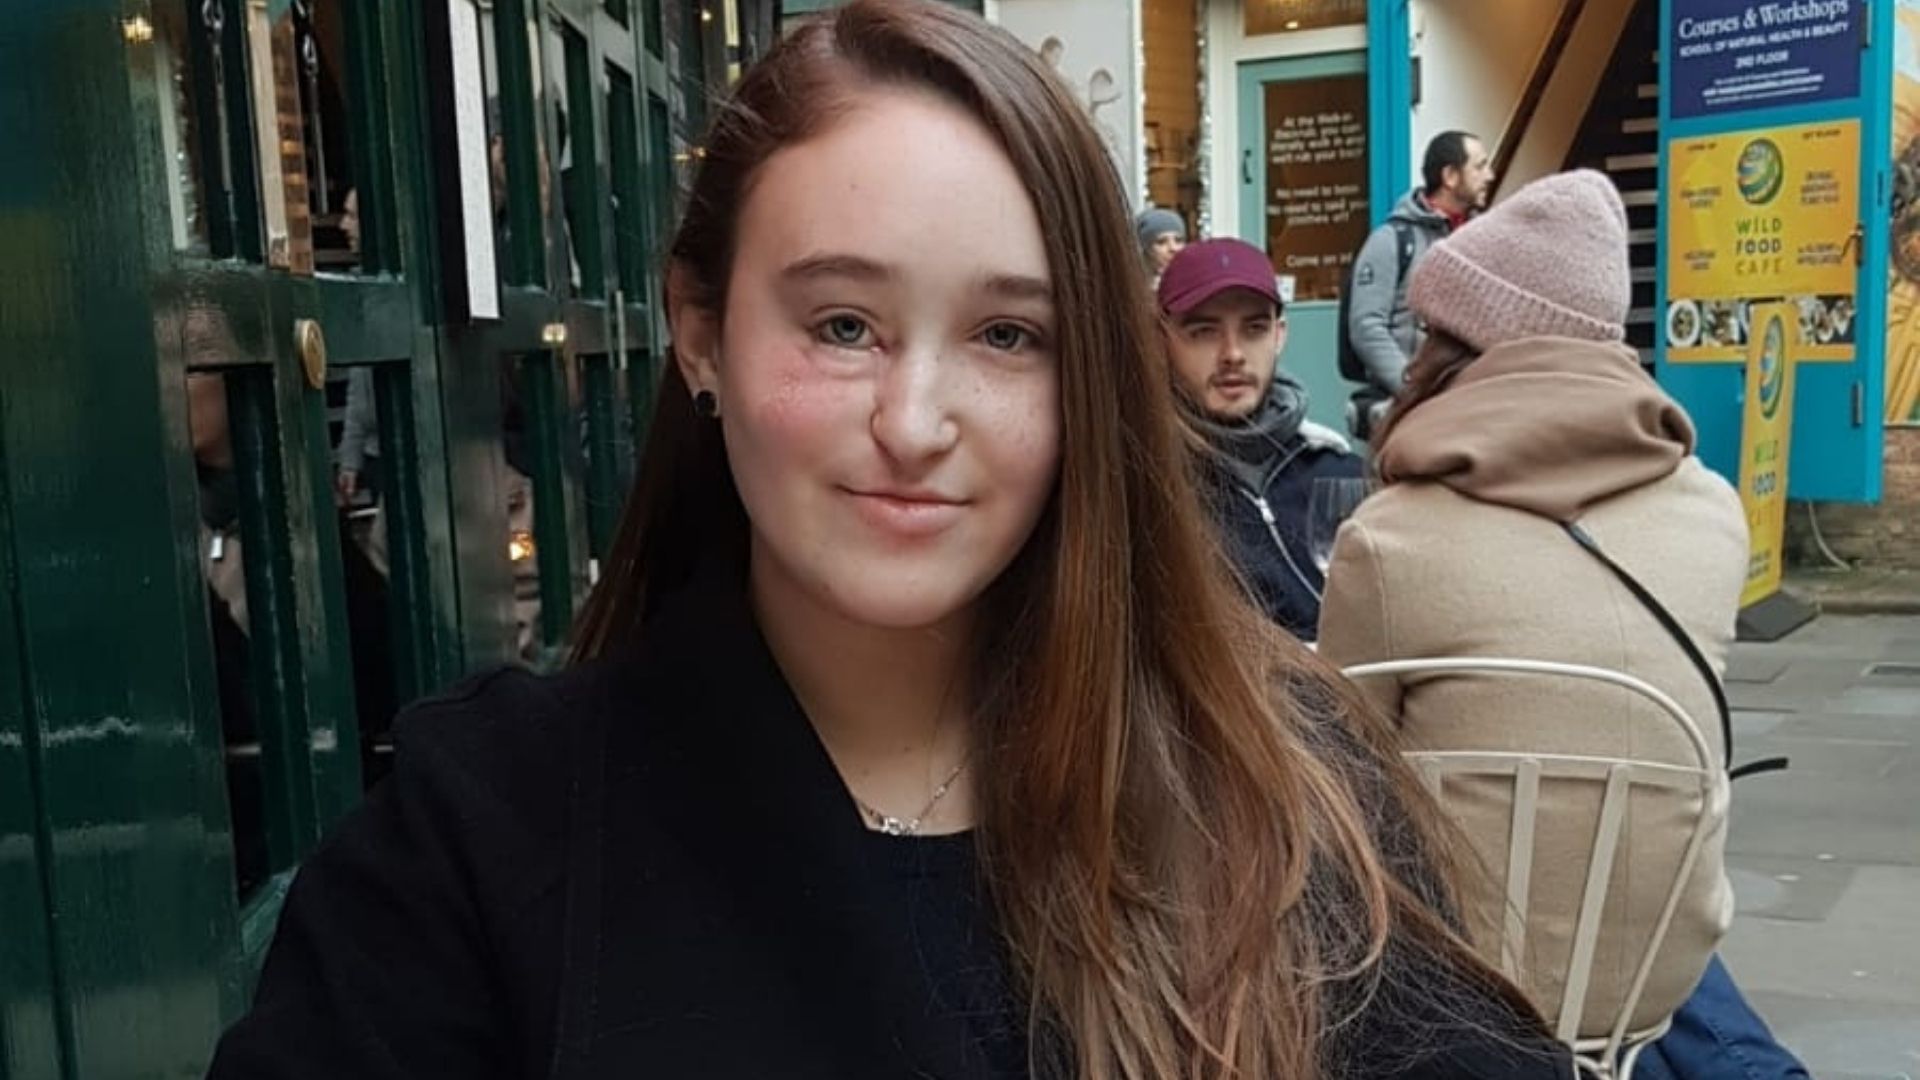 Abbie, a 16-year-old white woman who has long brown hair and facial scarring. She's wearing a black jacket and jumper and sitting outdoors at a cafe table on a street.